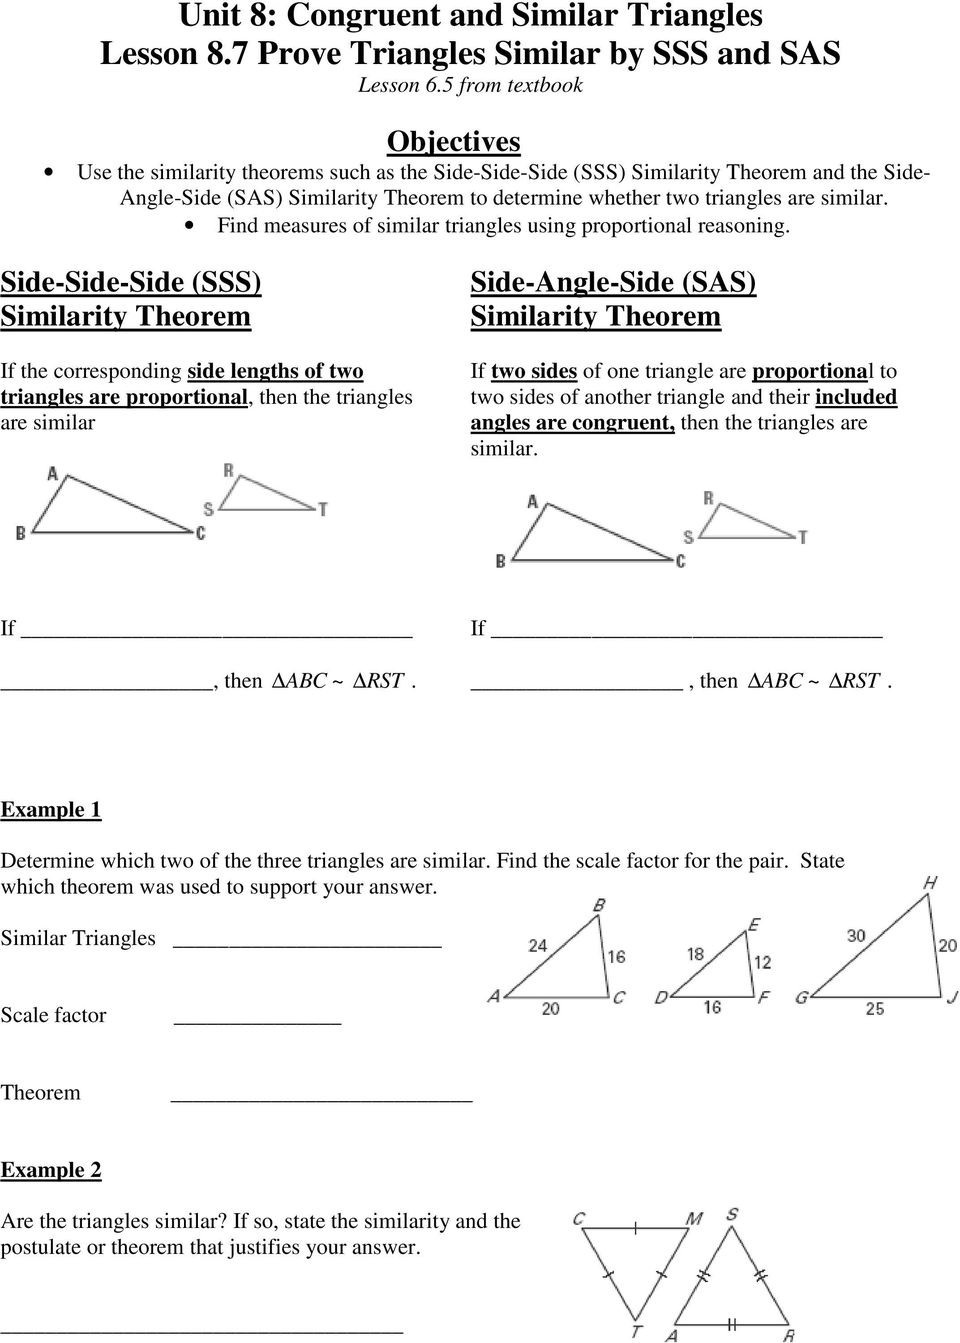 Proving Triangles Similar Worksheet Unit 8 Congruent and Similar Triangles Lesson 8 1 Apply